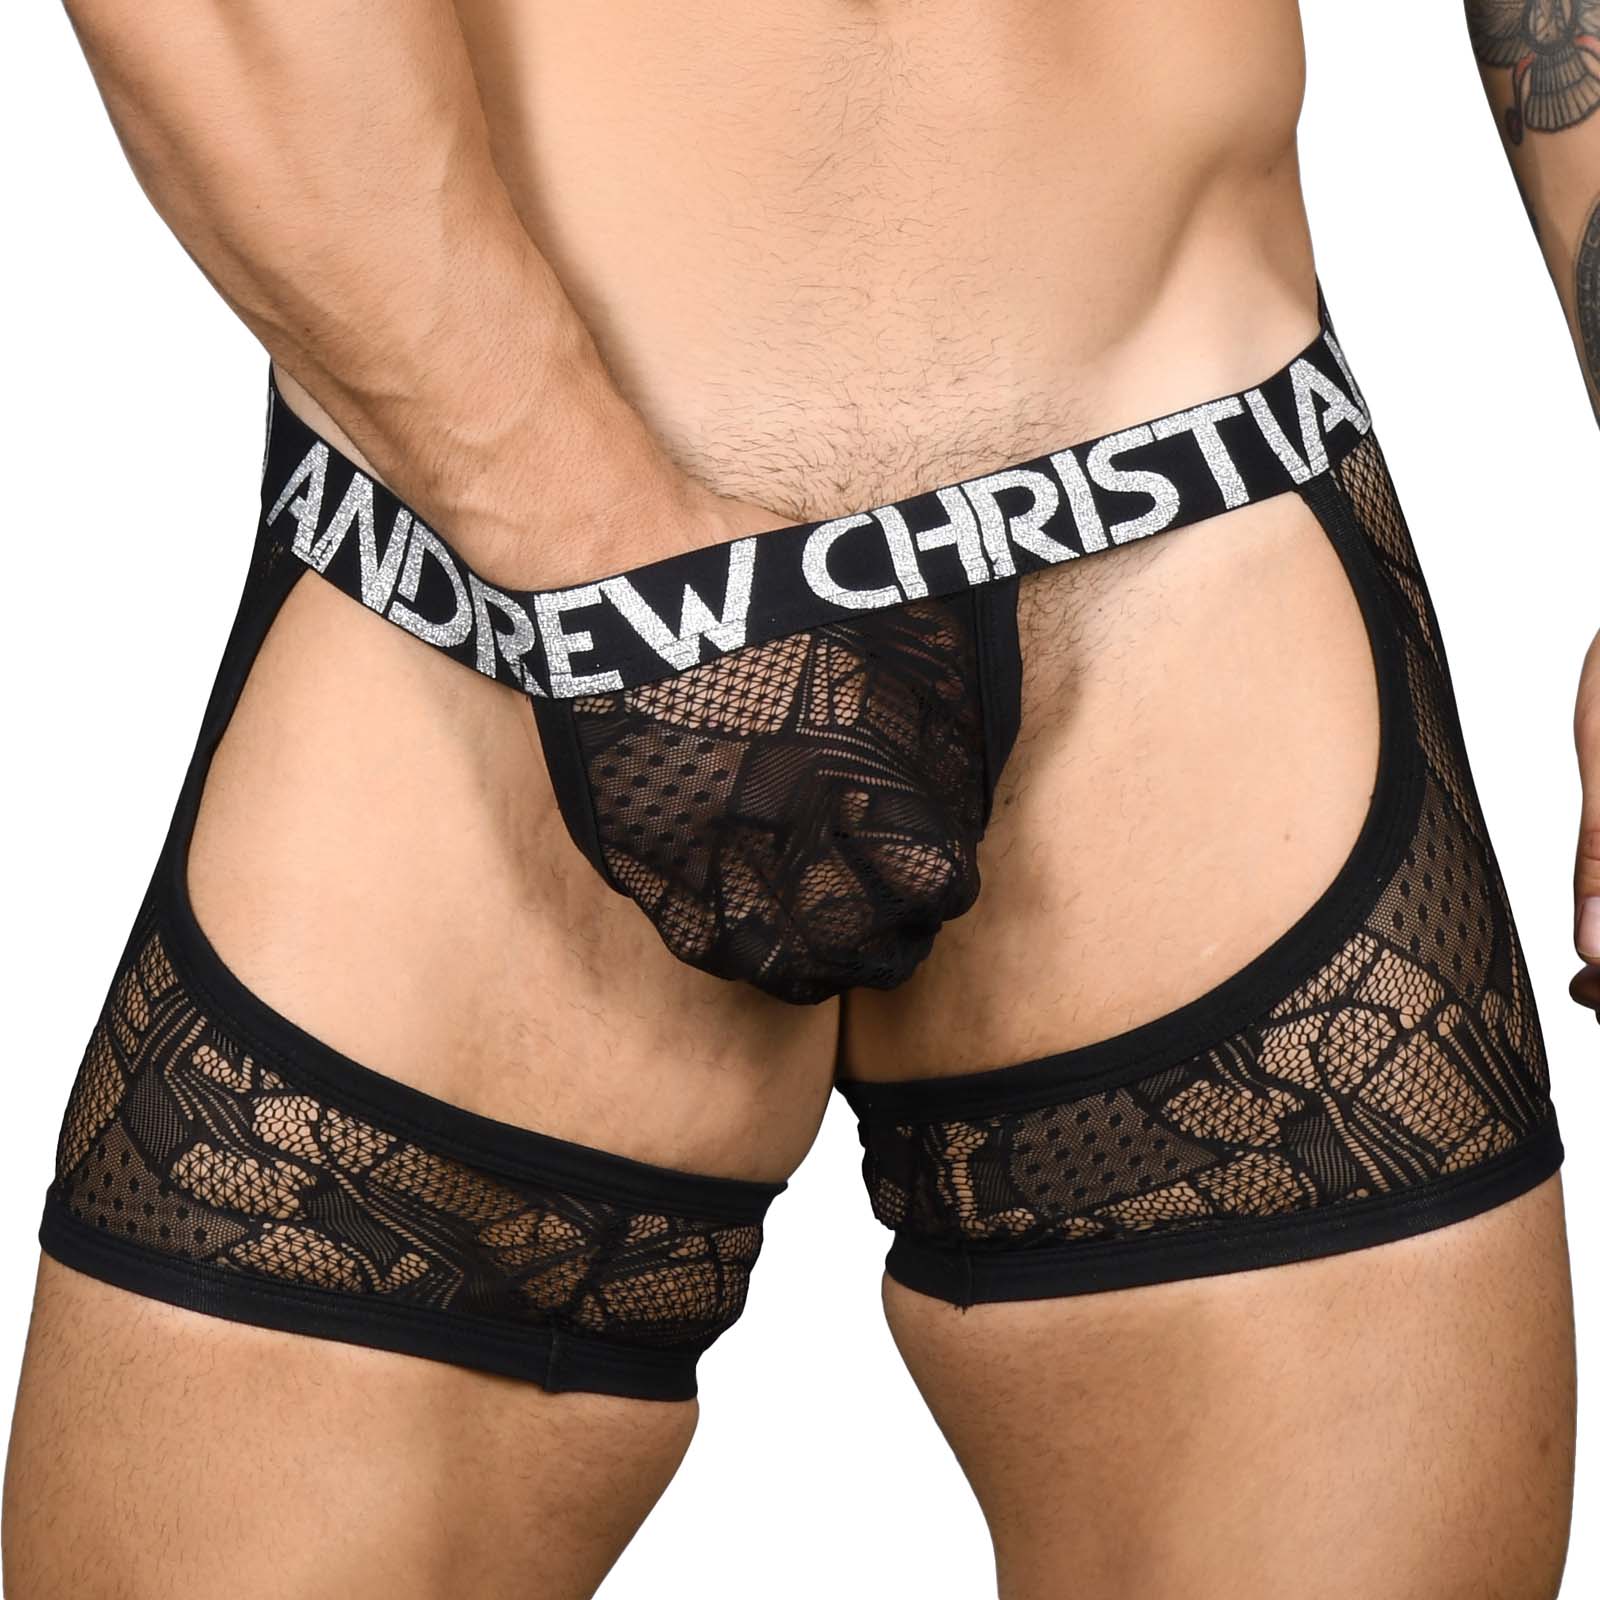 String Andrew Christian Flare Lace Chap 91115